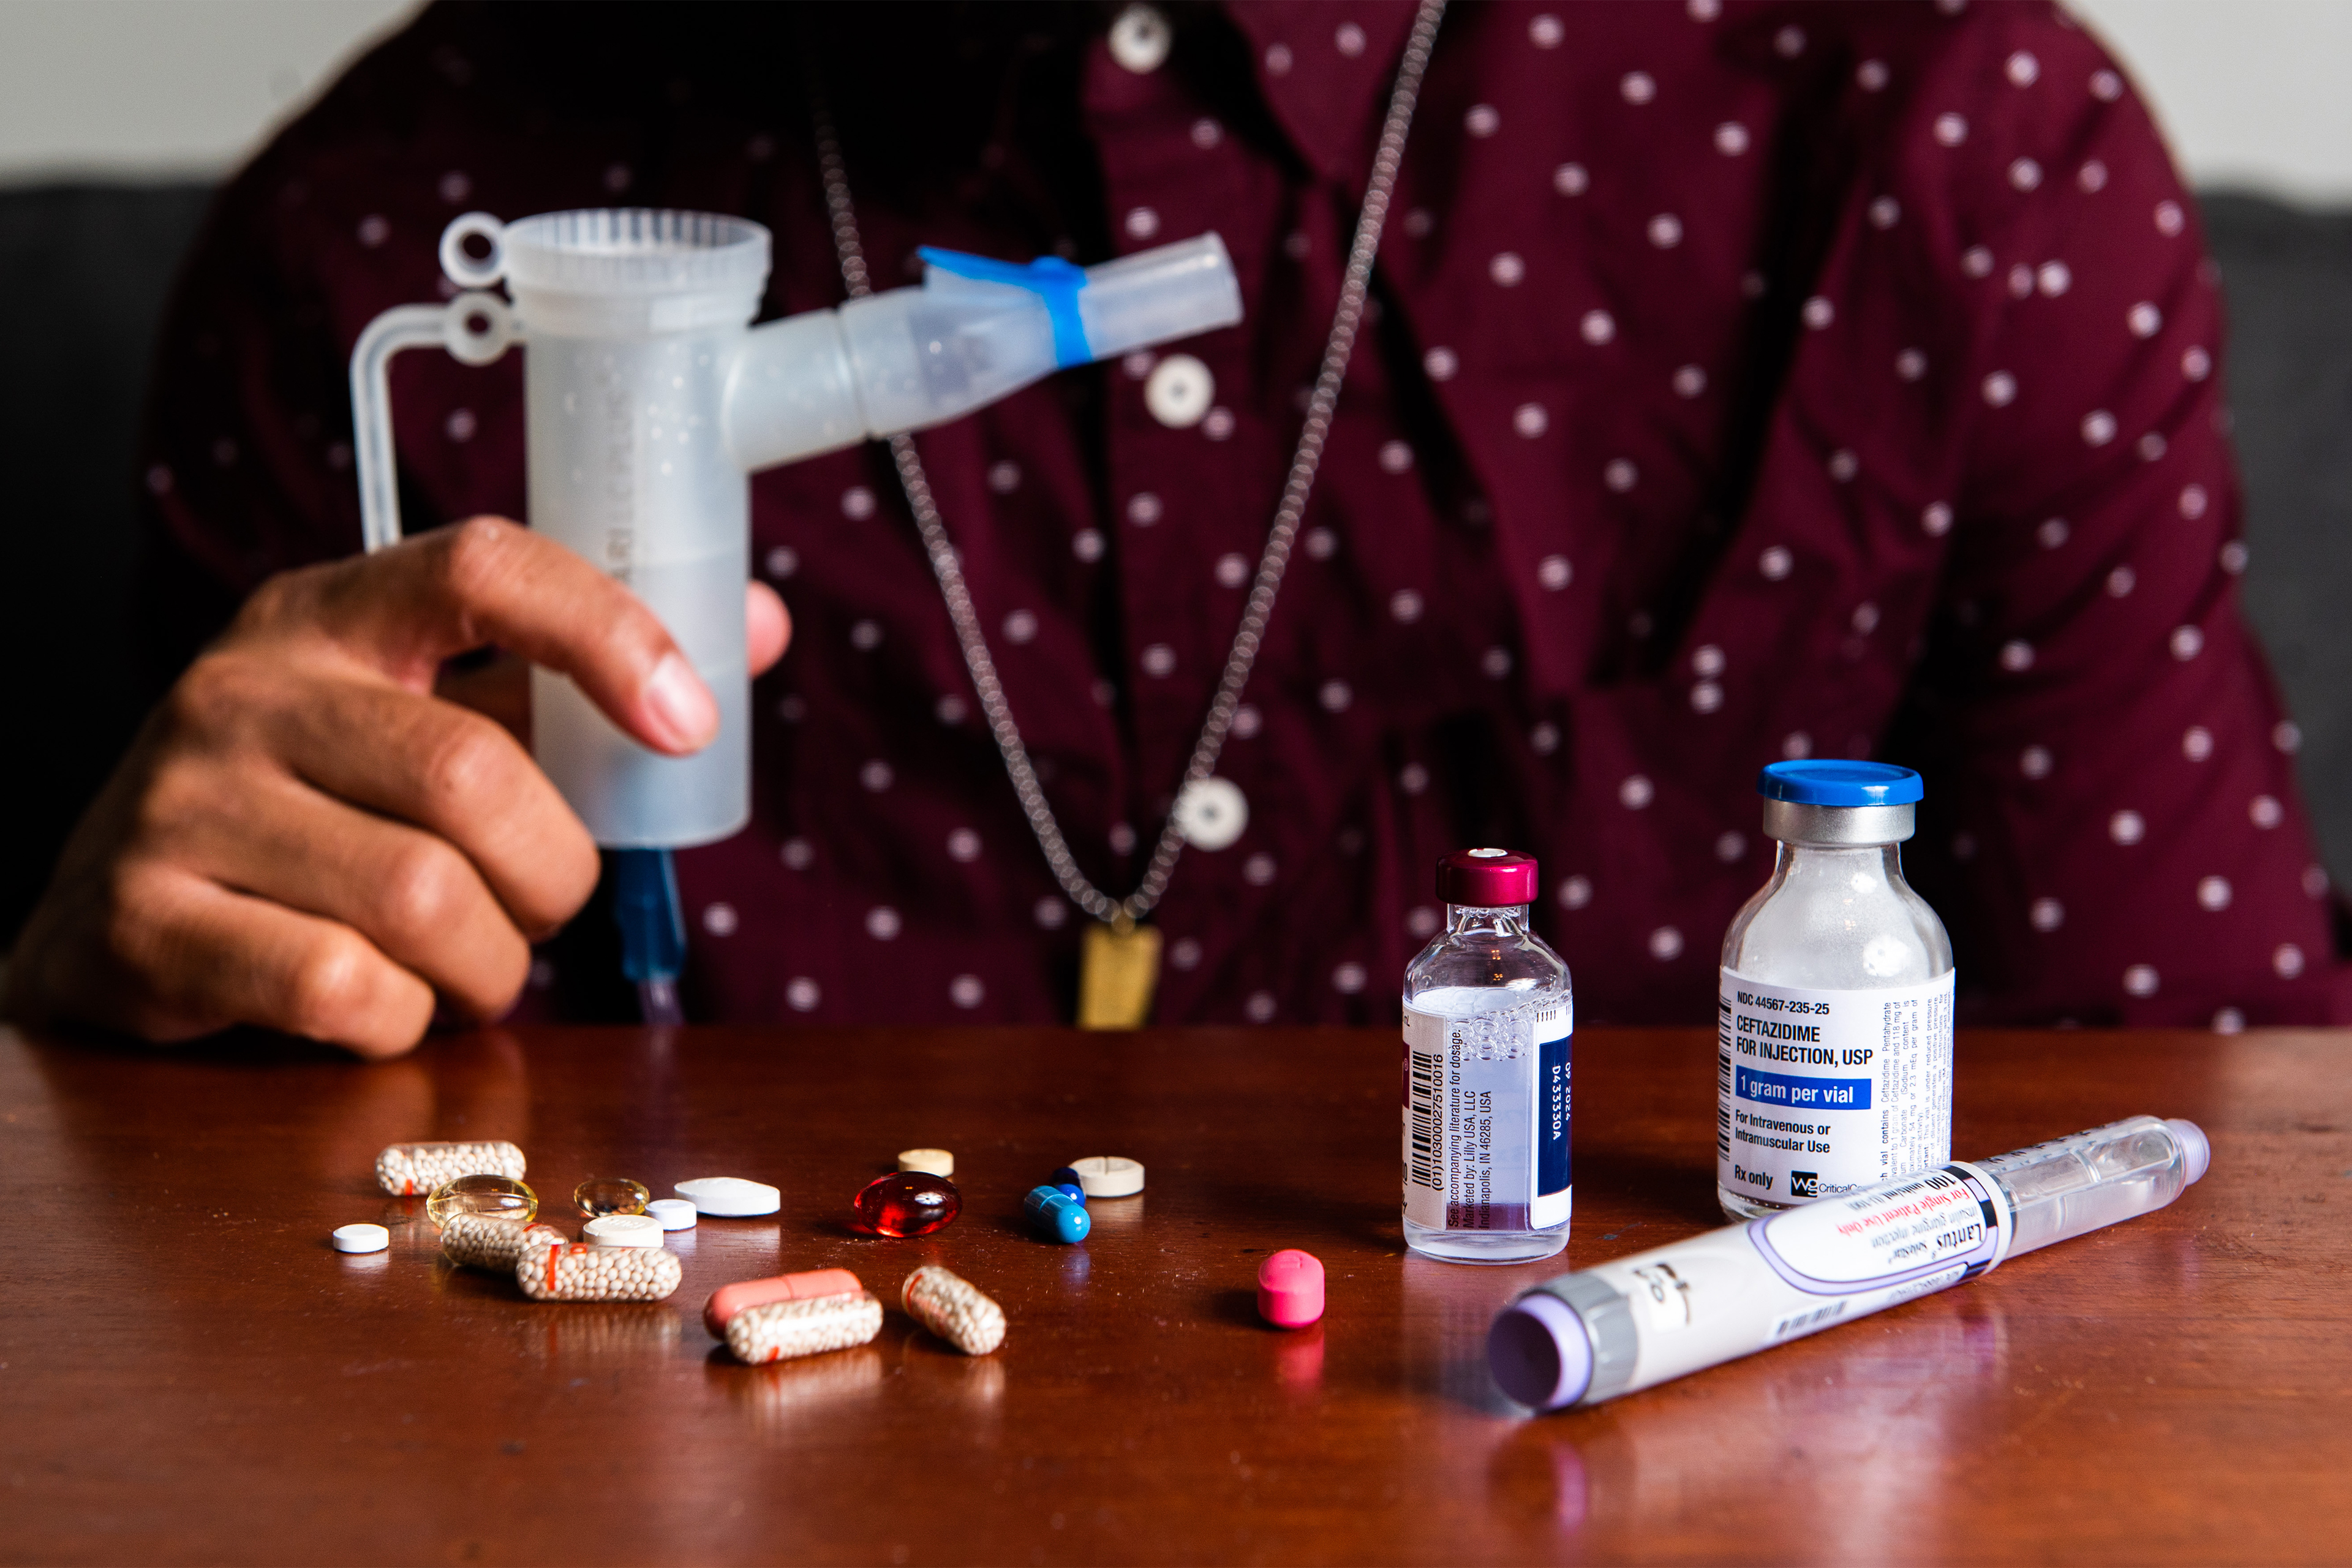 A close-up photo shows Nicholas Kelly's right hand holding a nebulizer with a variety of pills and medication vials on a table in front of him.